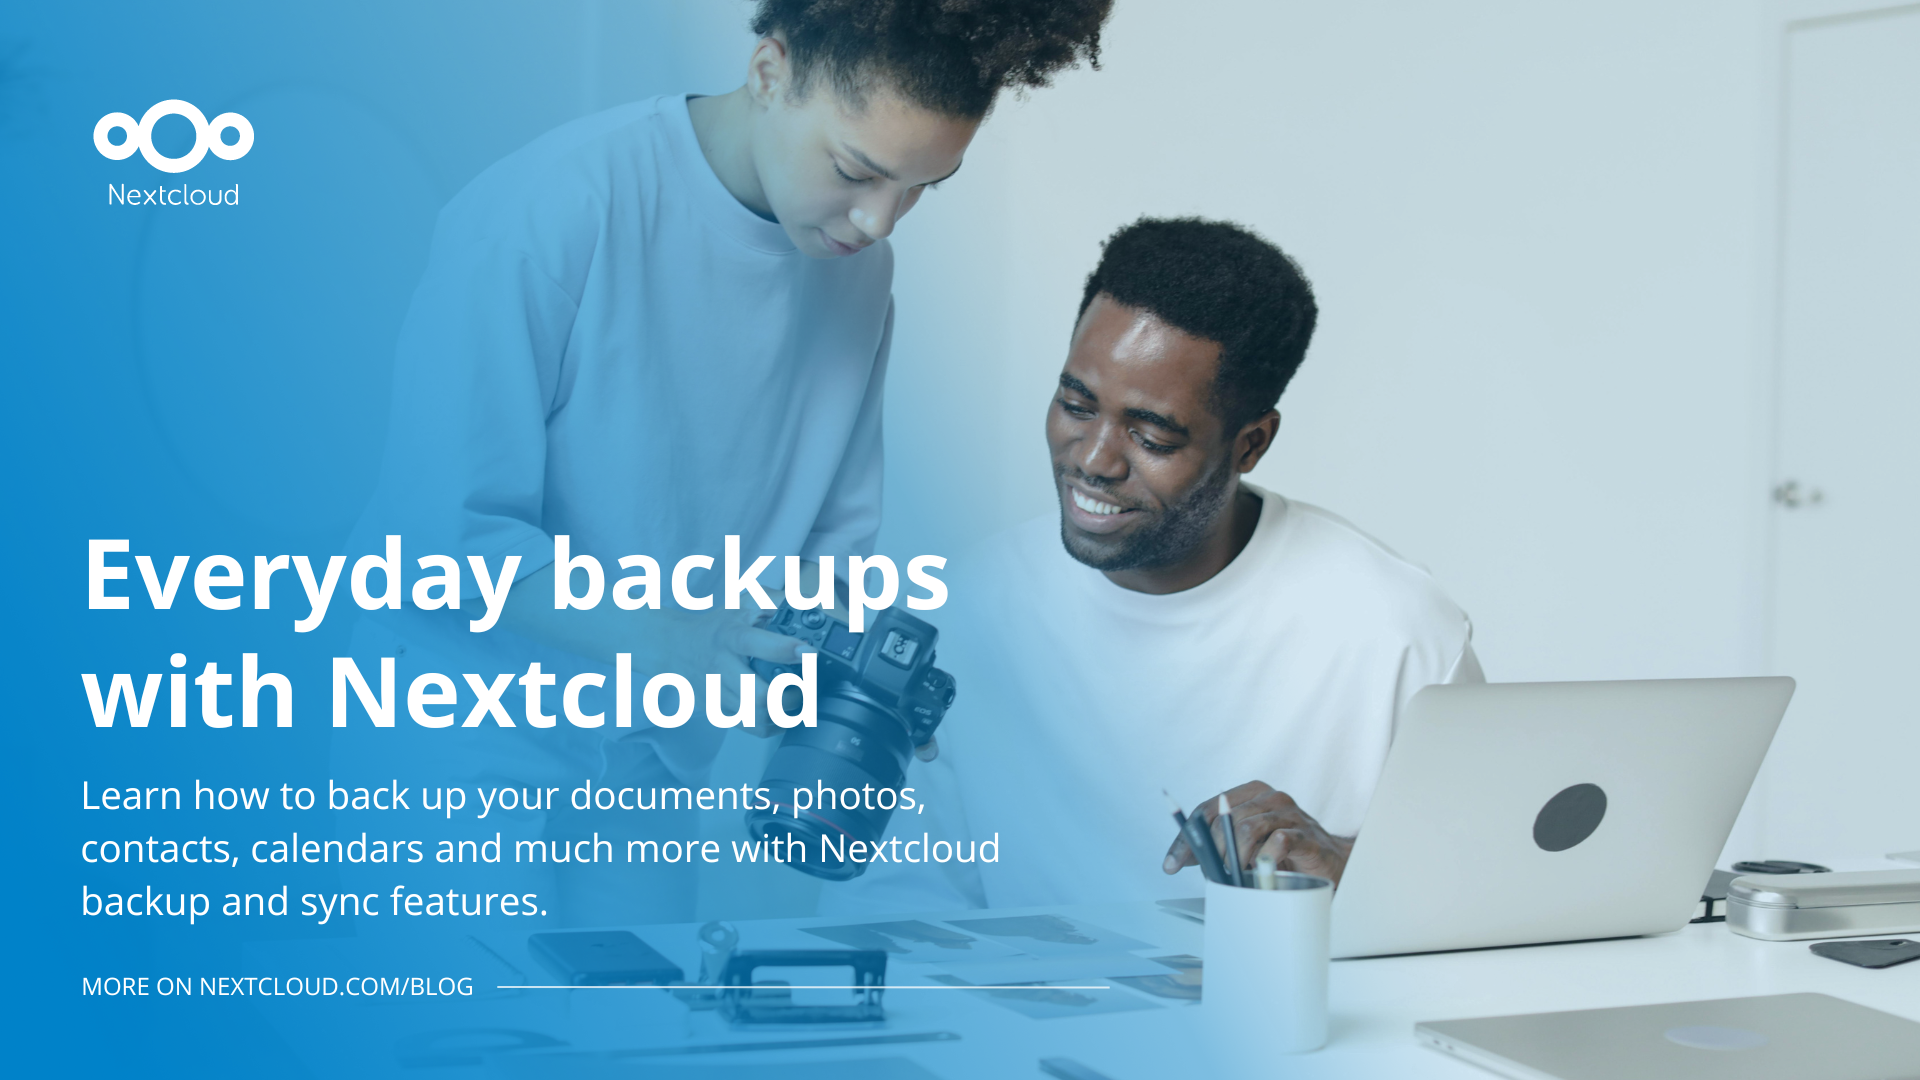 How to backup your files with Nextcloud